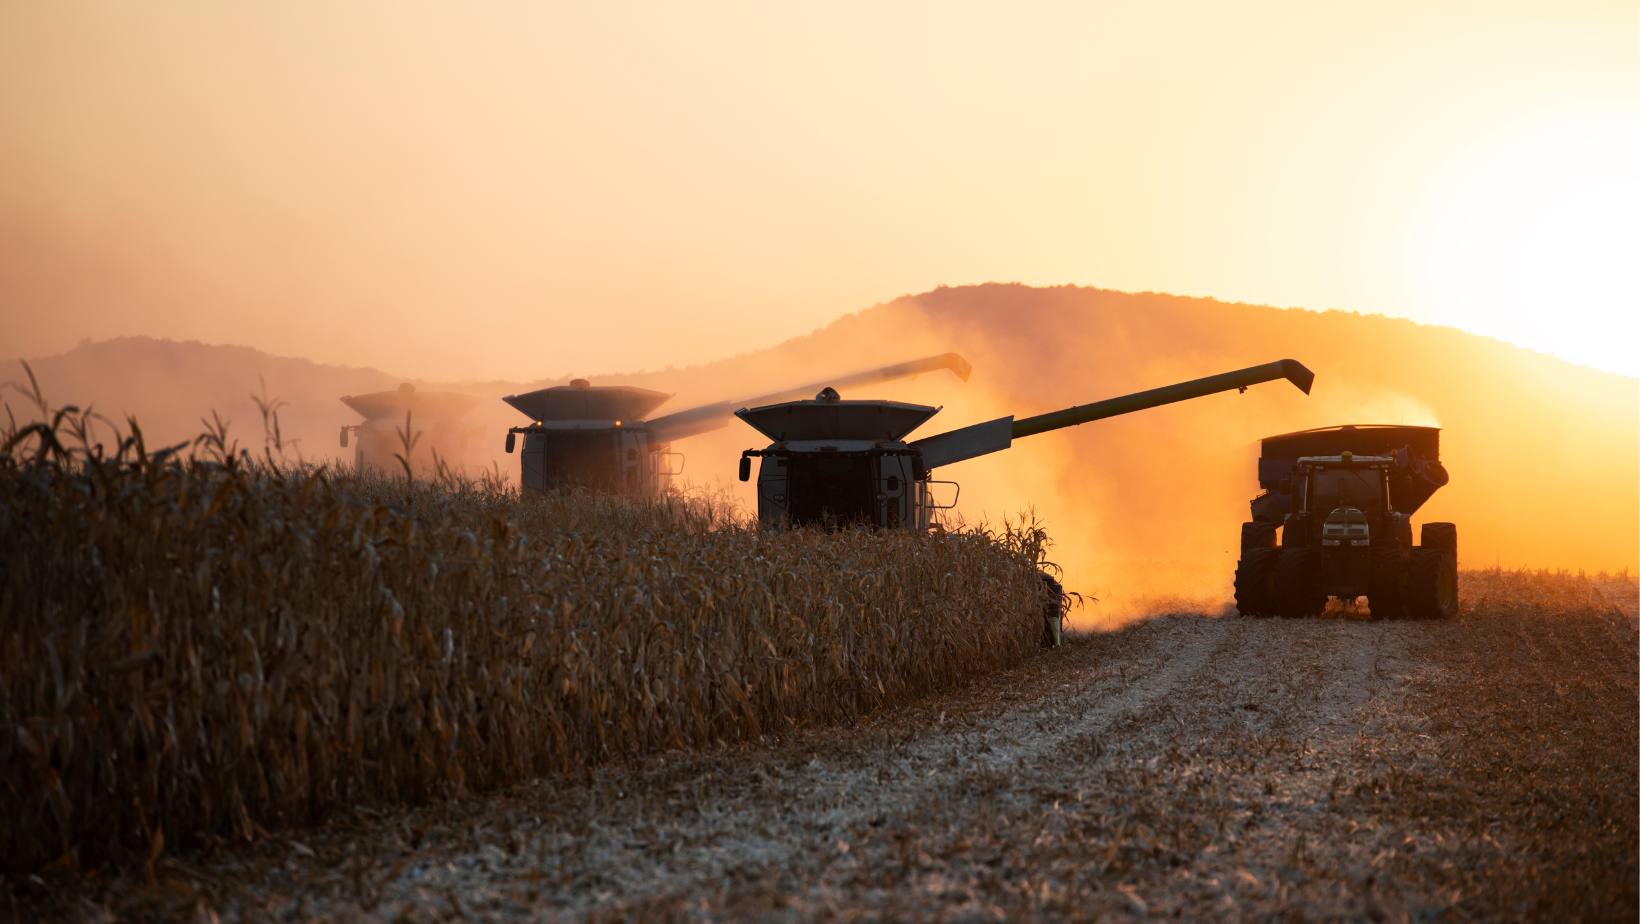 Industrial farming machinery in a corn field with mountains in the backdrop